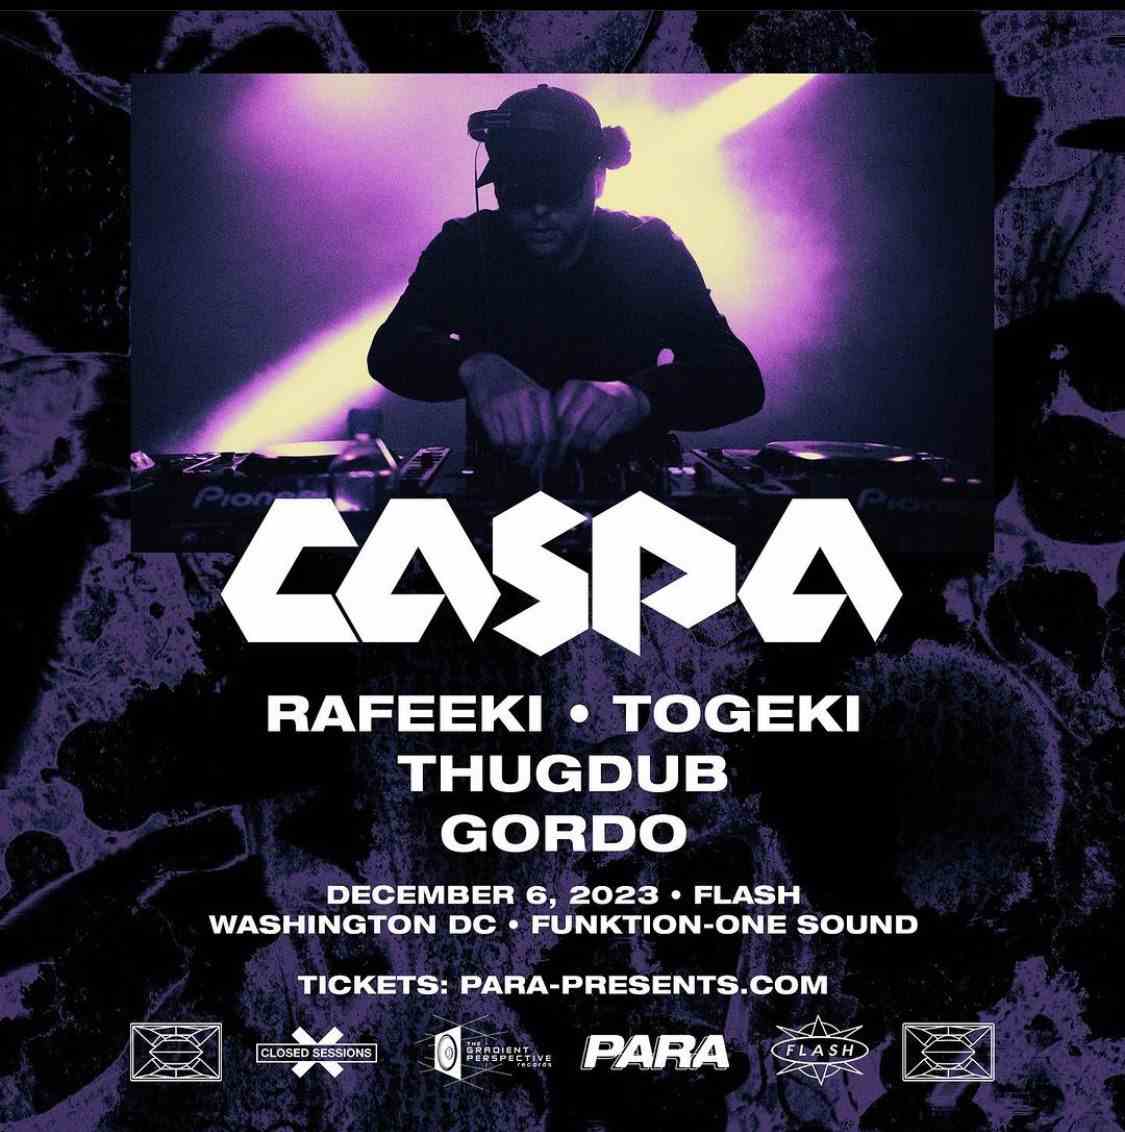 Para Presents, The Gradient Perspective & Closed Sessions Presents: Caspa event flyer